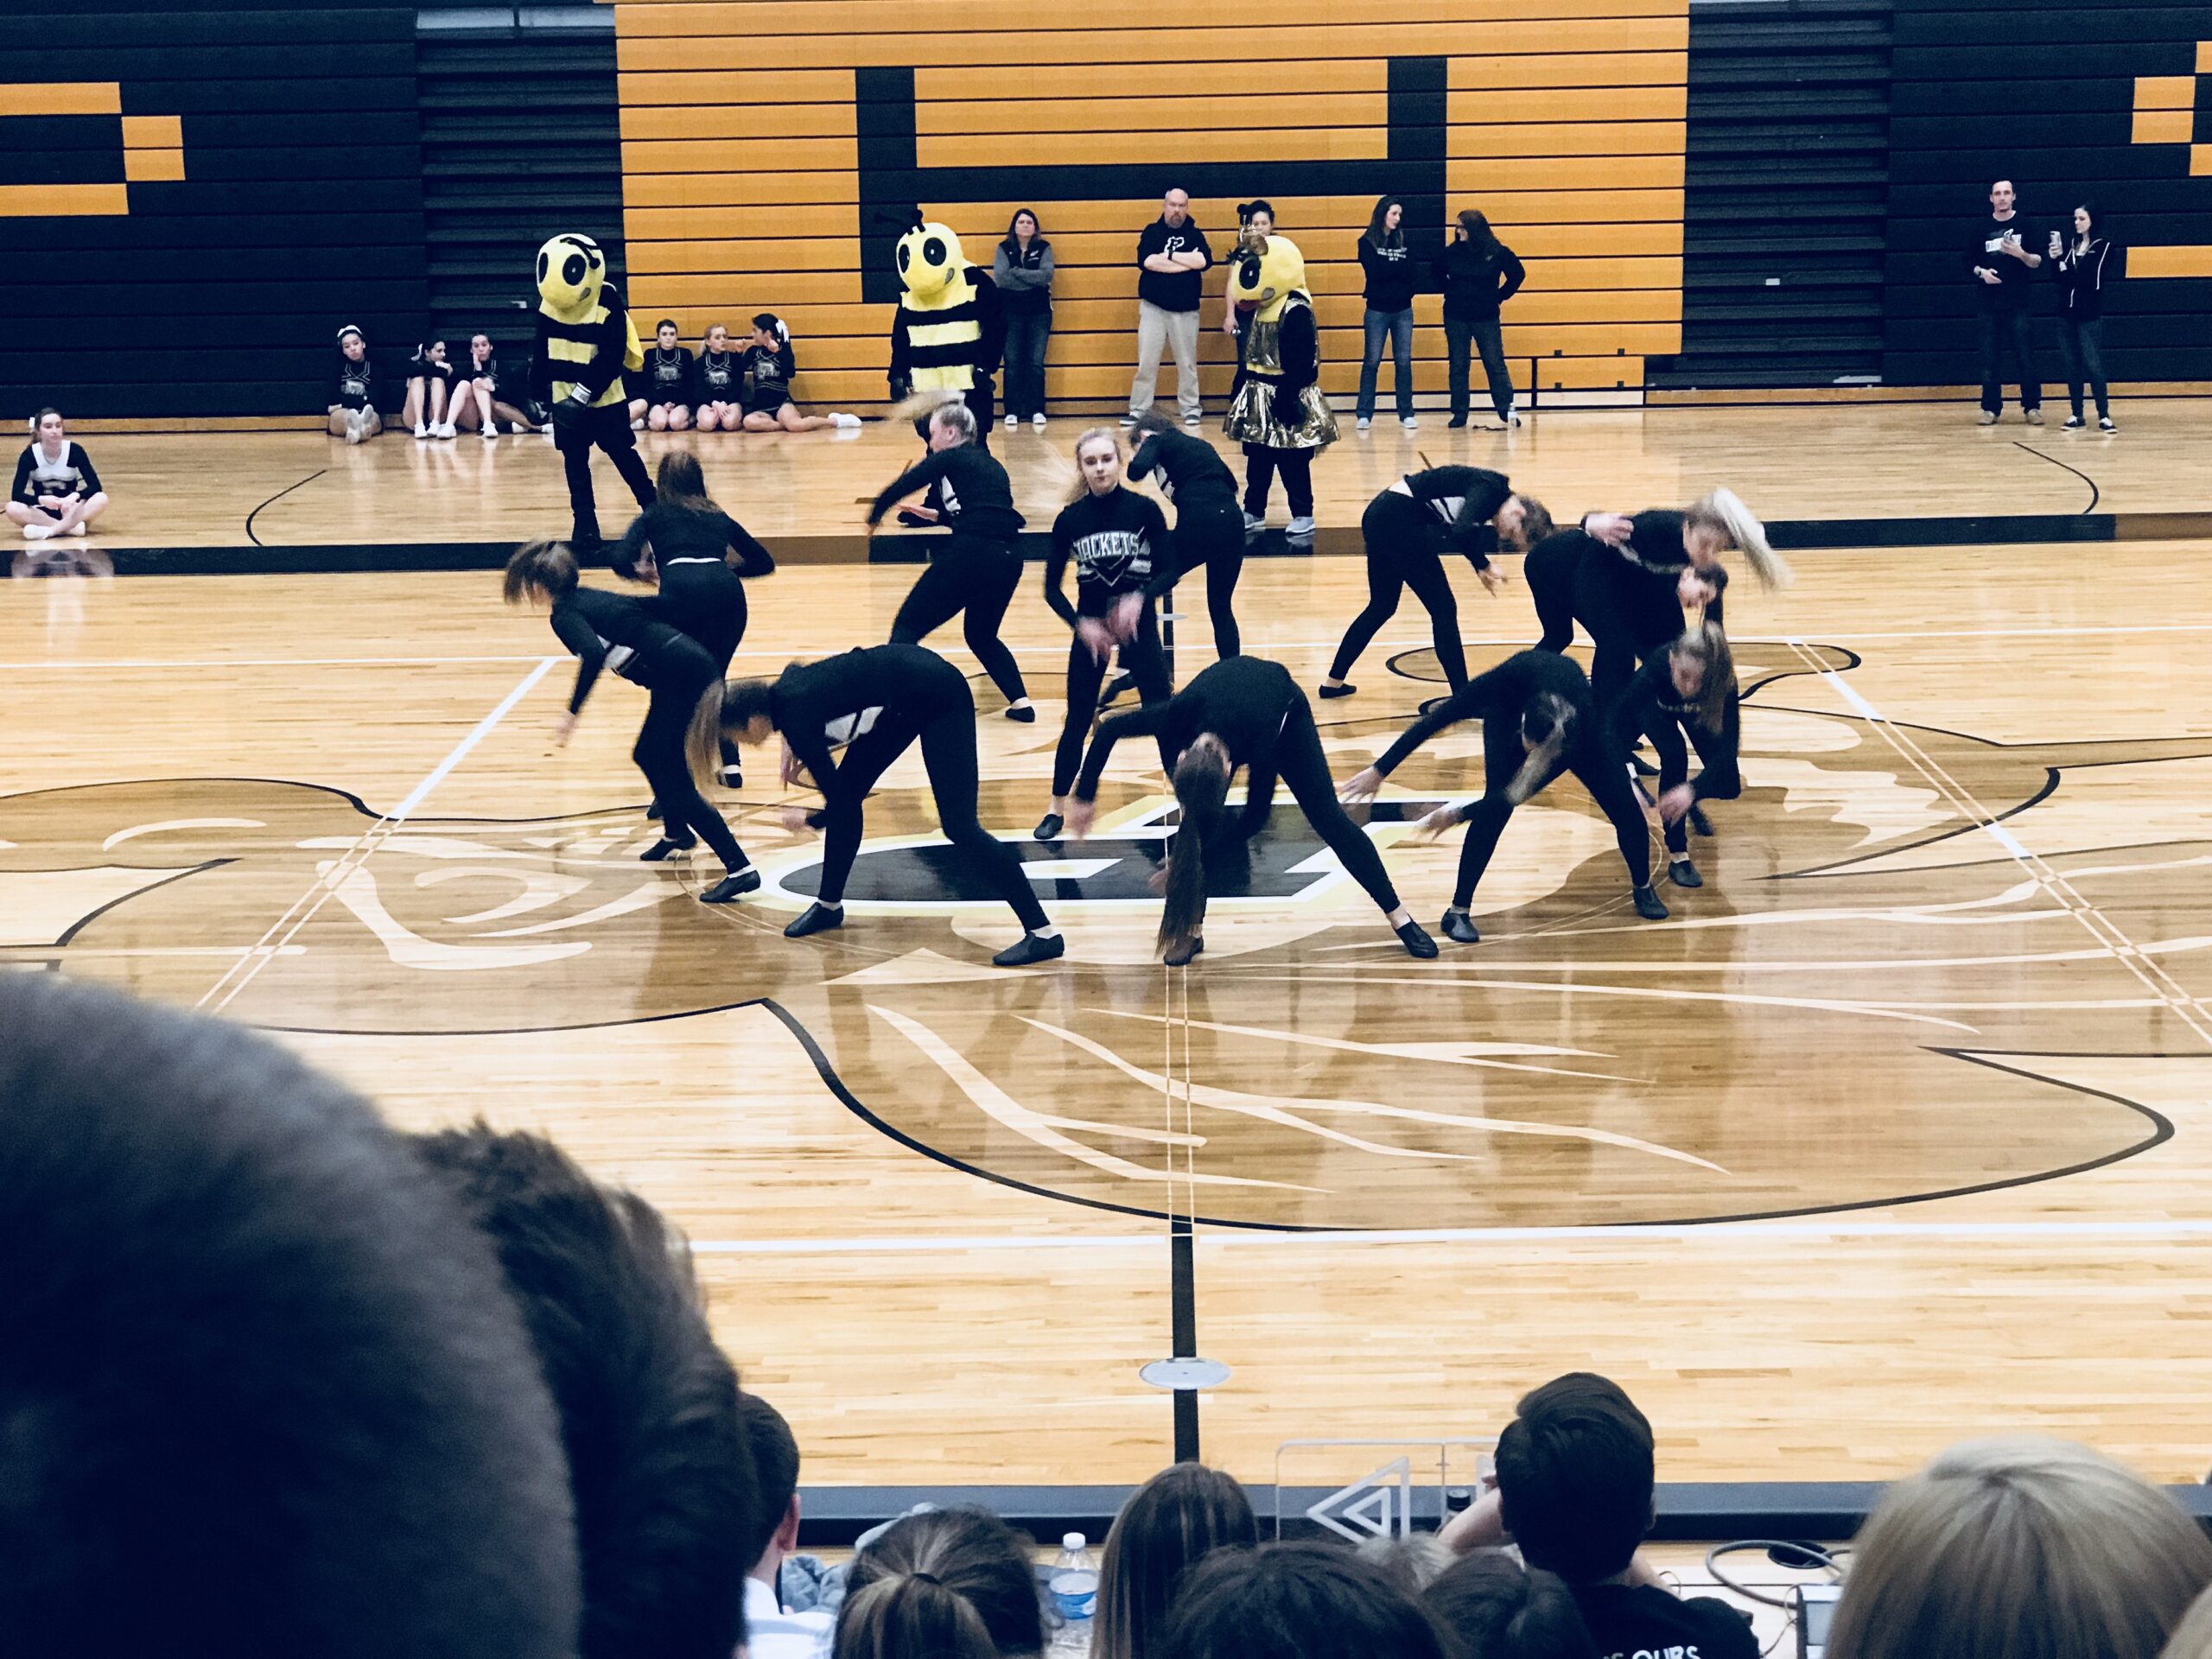 Dancing Their Way To States: An Update on the Dance Team